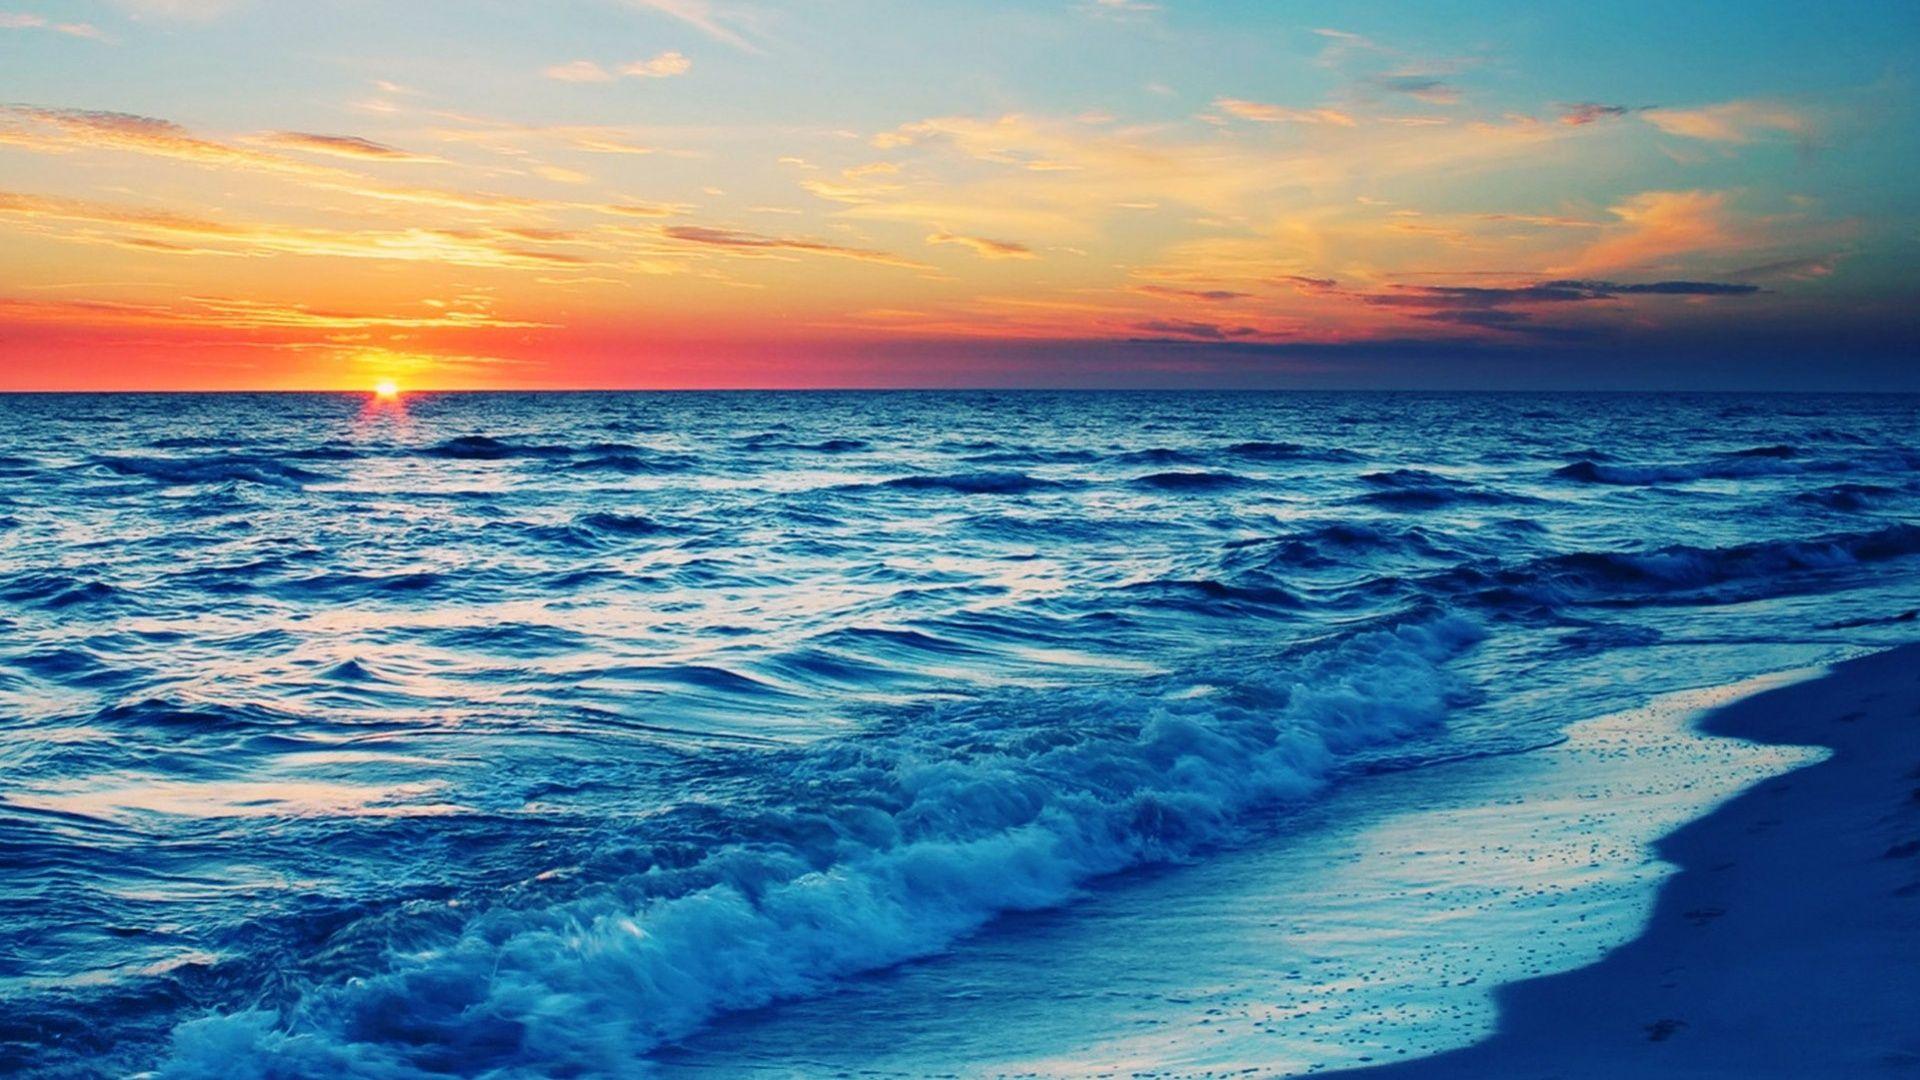 Wallpaper.wiki Sunset Beaches Background HQ PIC WPD005027